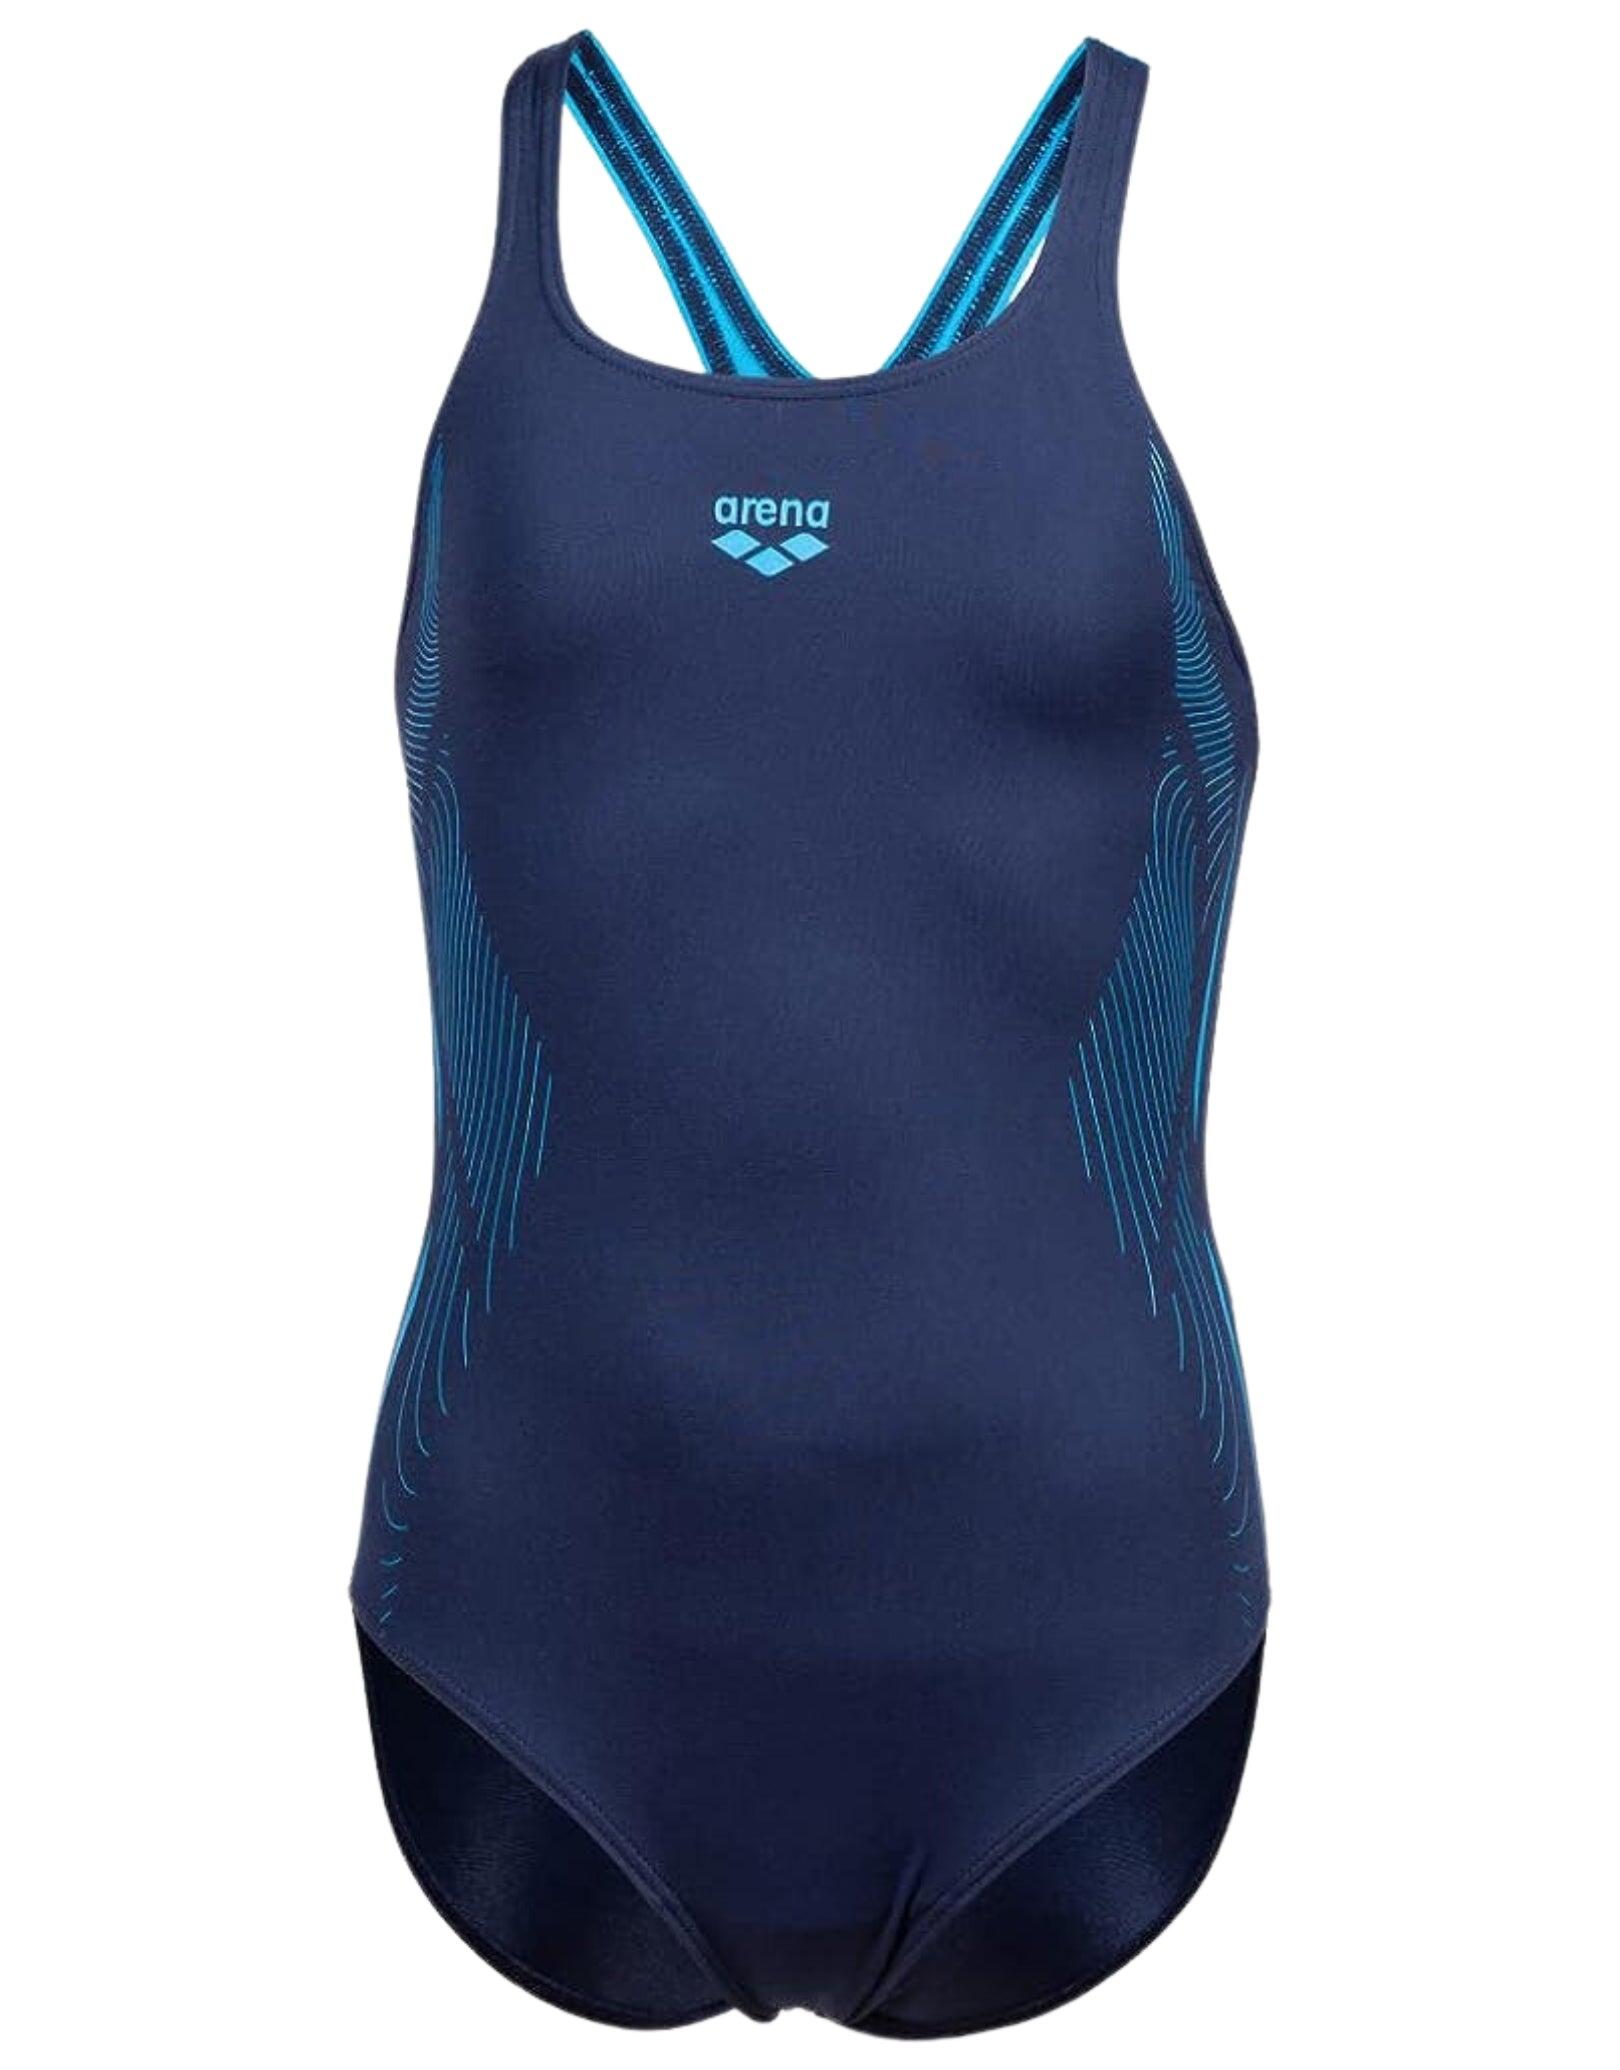 ARENA Arena Girls Pro Back Graphic Swimsuit - Navy/Turquoise